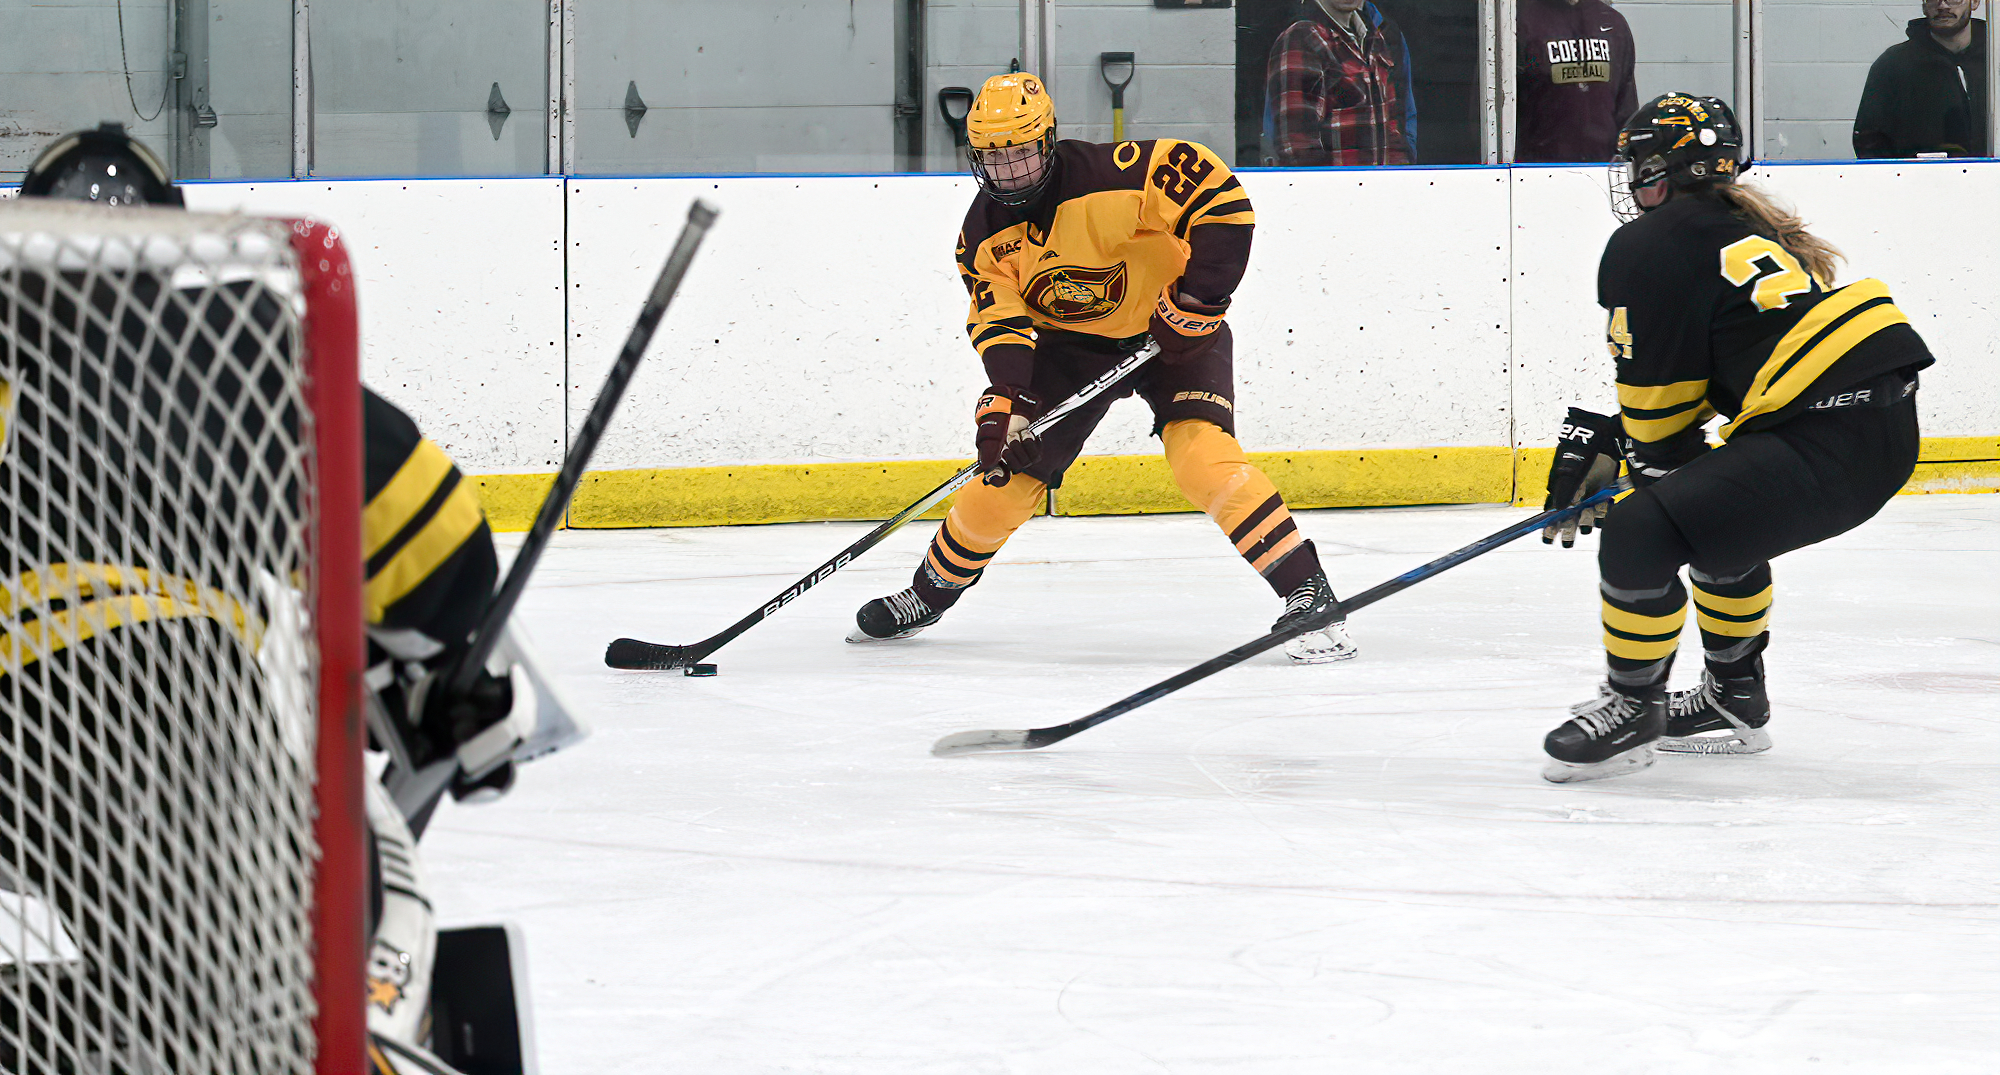 Morgan Sauvageau gets ready to take a shot on goal in the third period of the Cobbers' game with Gustavus. She scored the lone goal for CC.